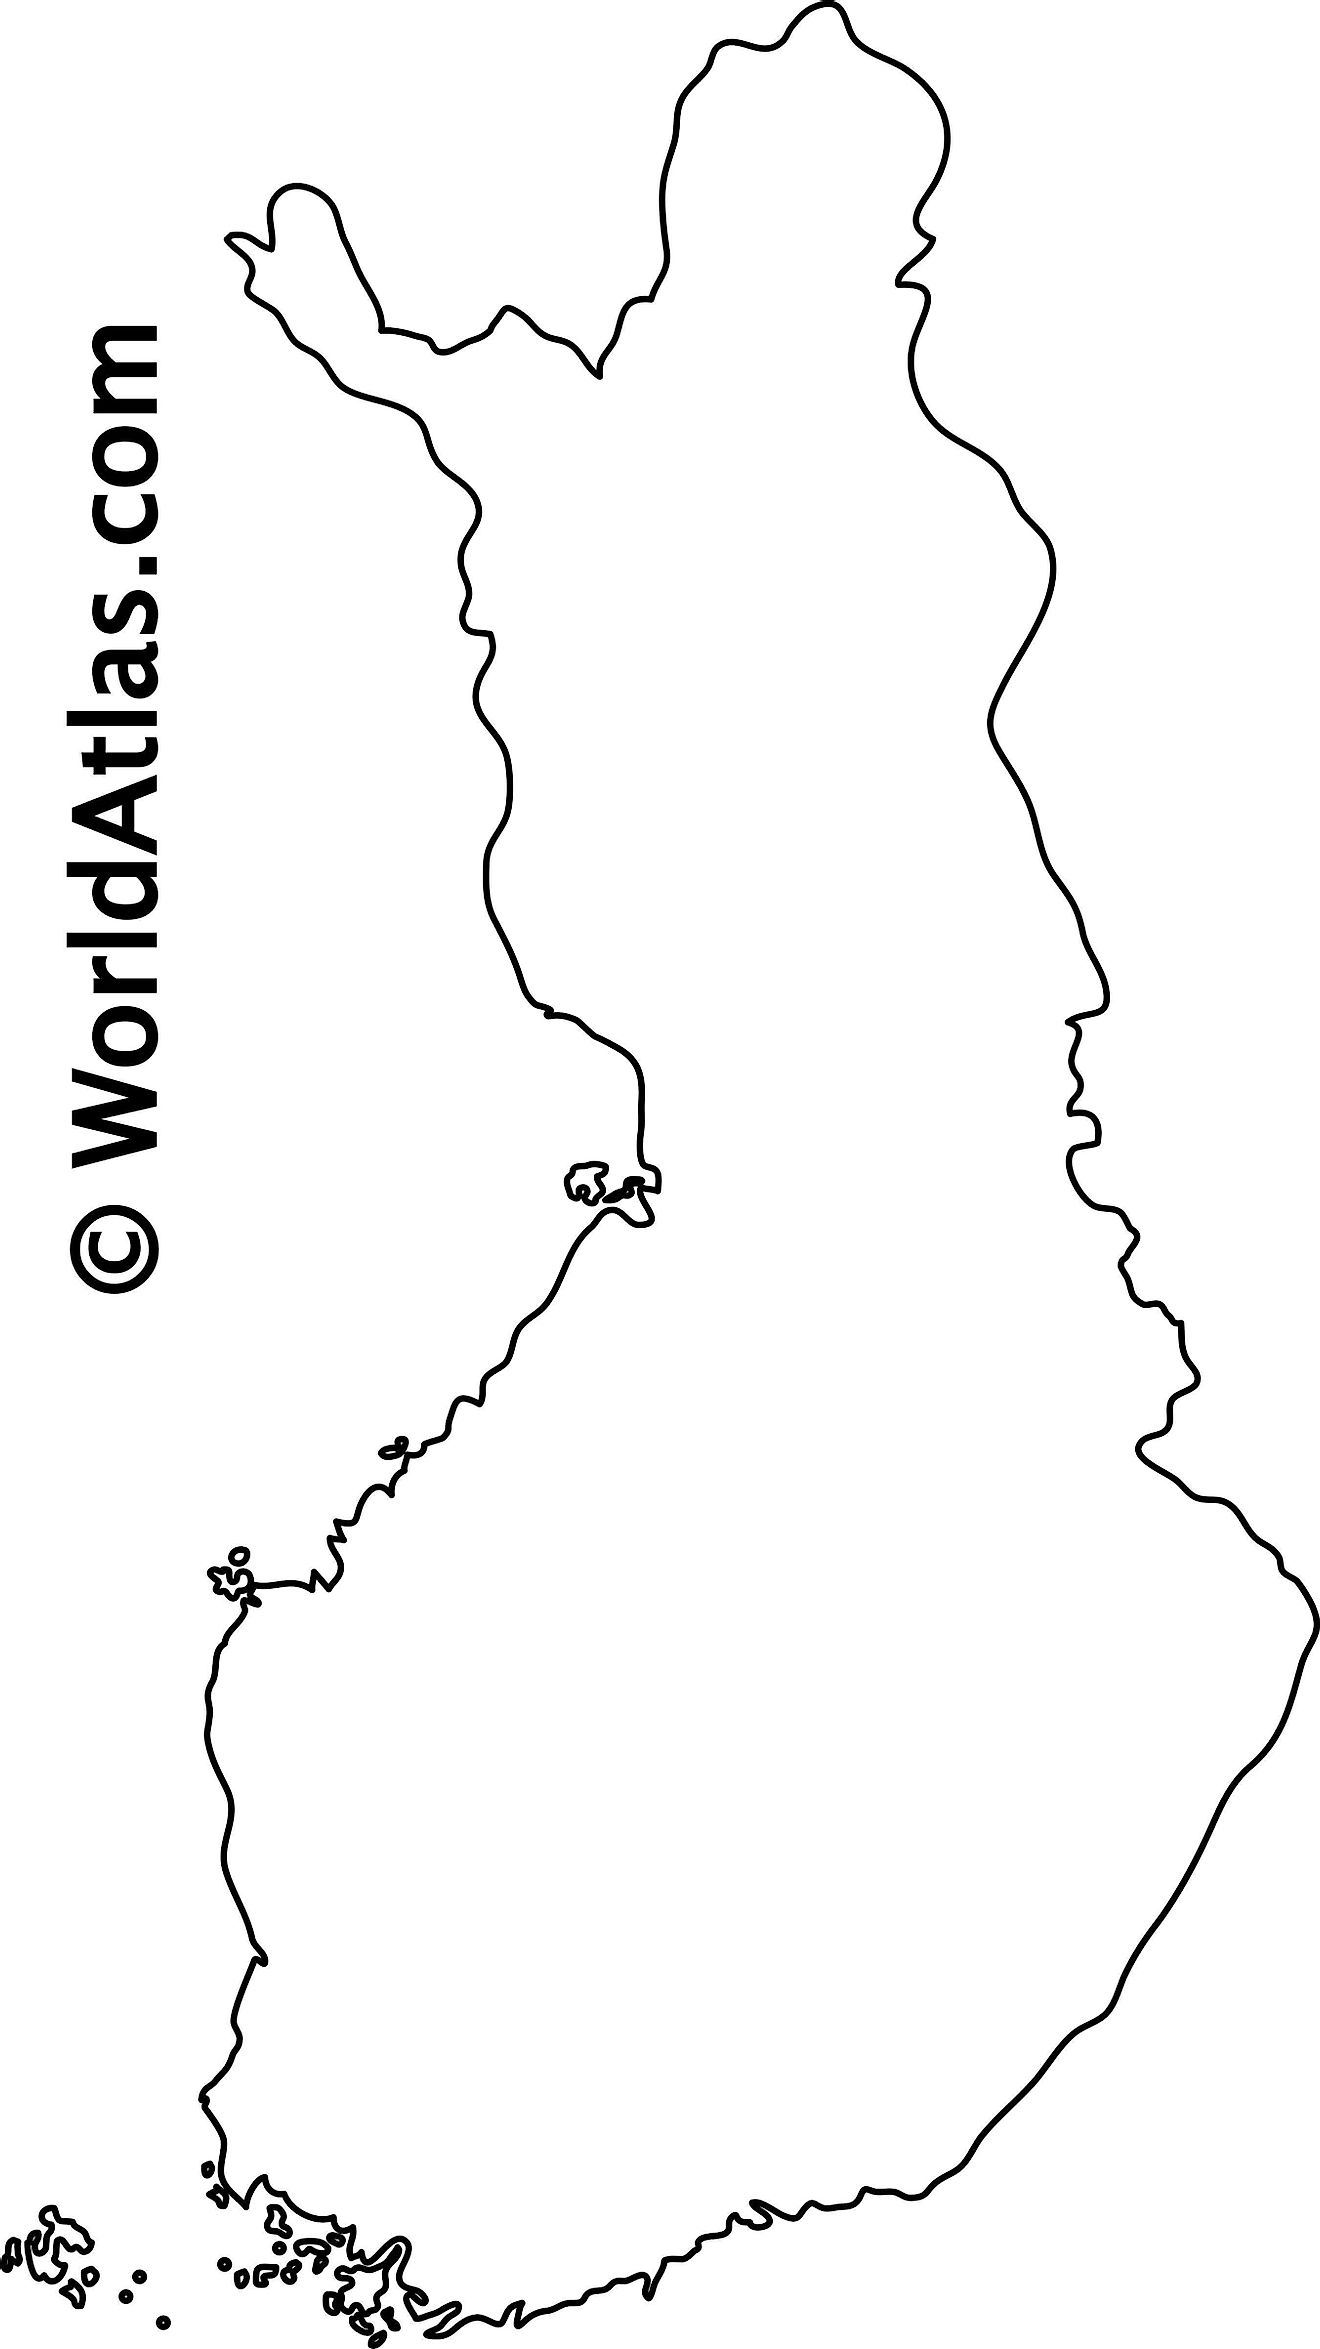 Blank Outline Map of Finland